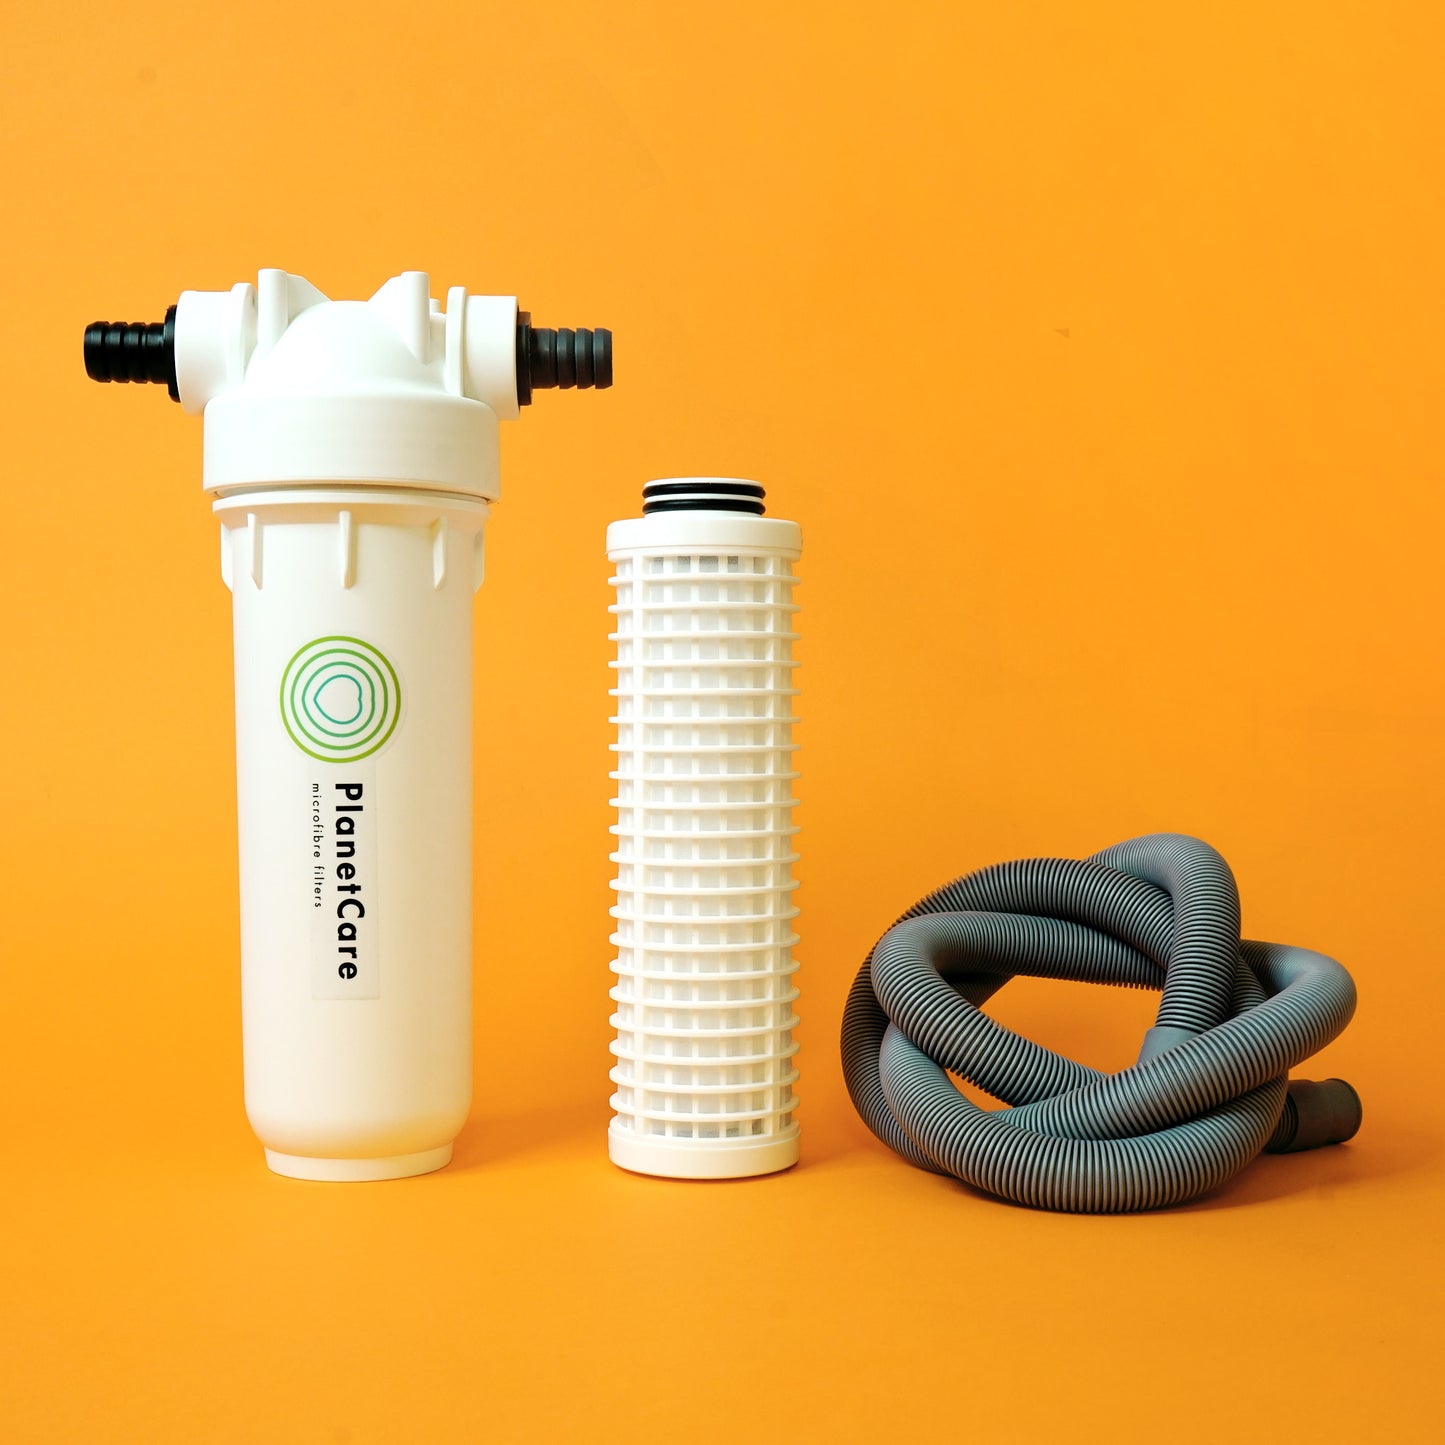 The PlanetCare microfiber filter, an at-home solution for microplastic pollution. Pictured here: the cartridge housing, a cartridge and a drain hose wrapped in a pretty knot